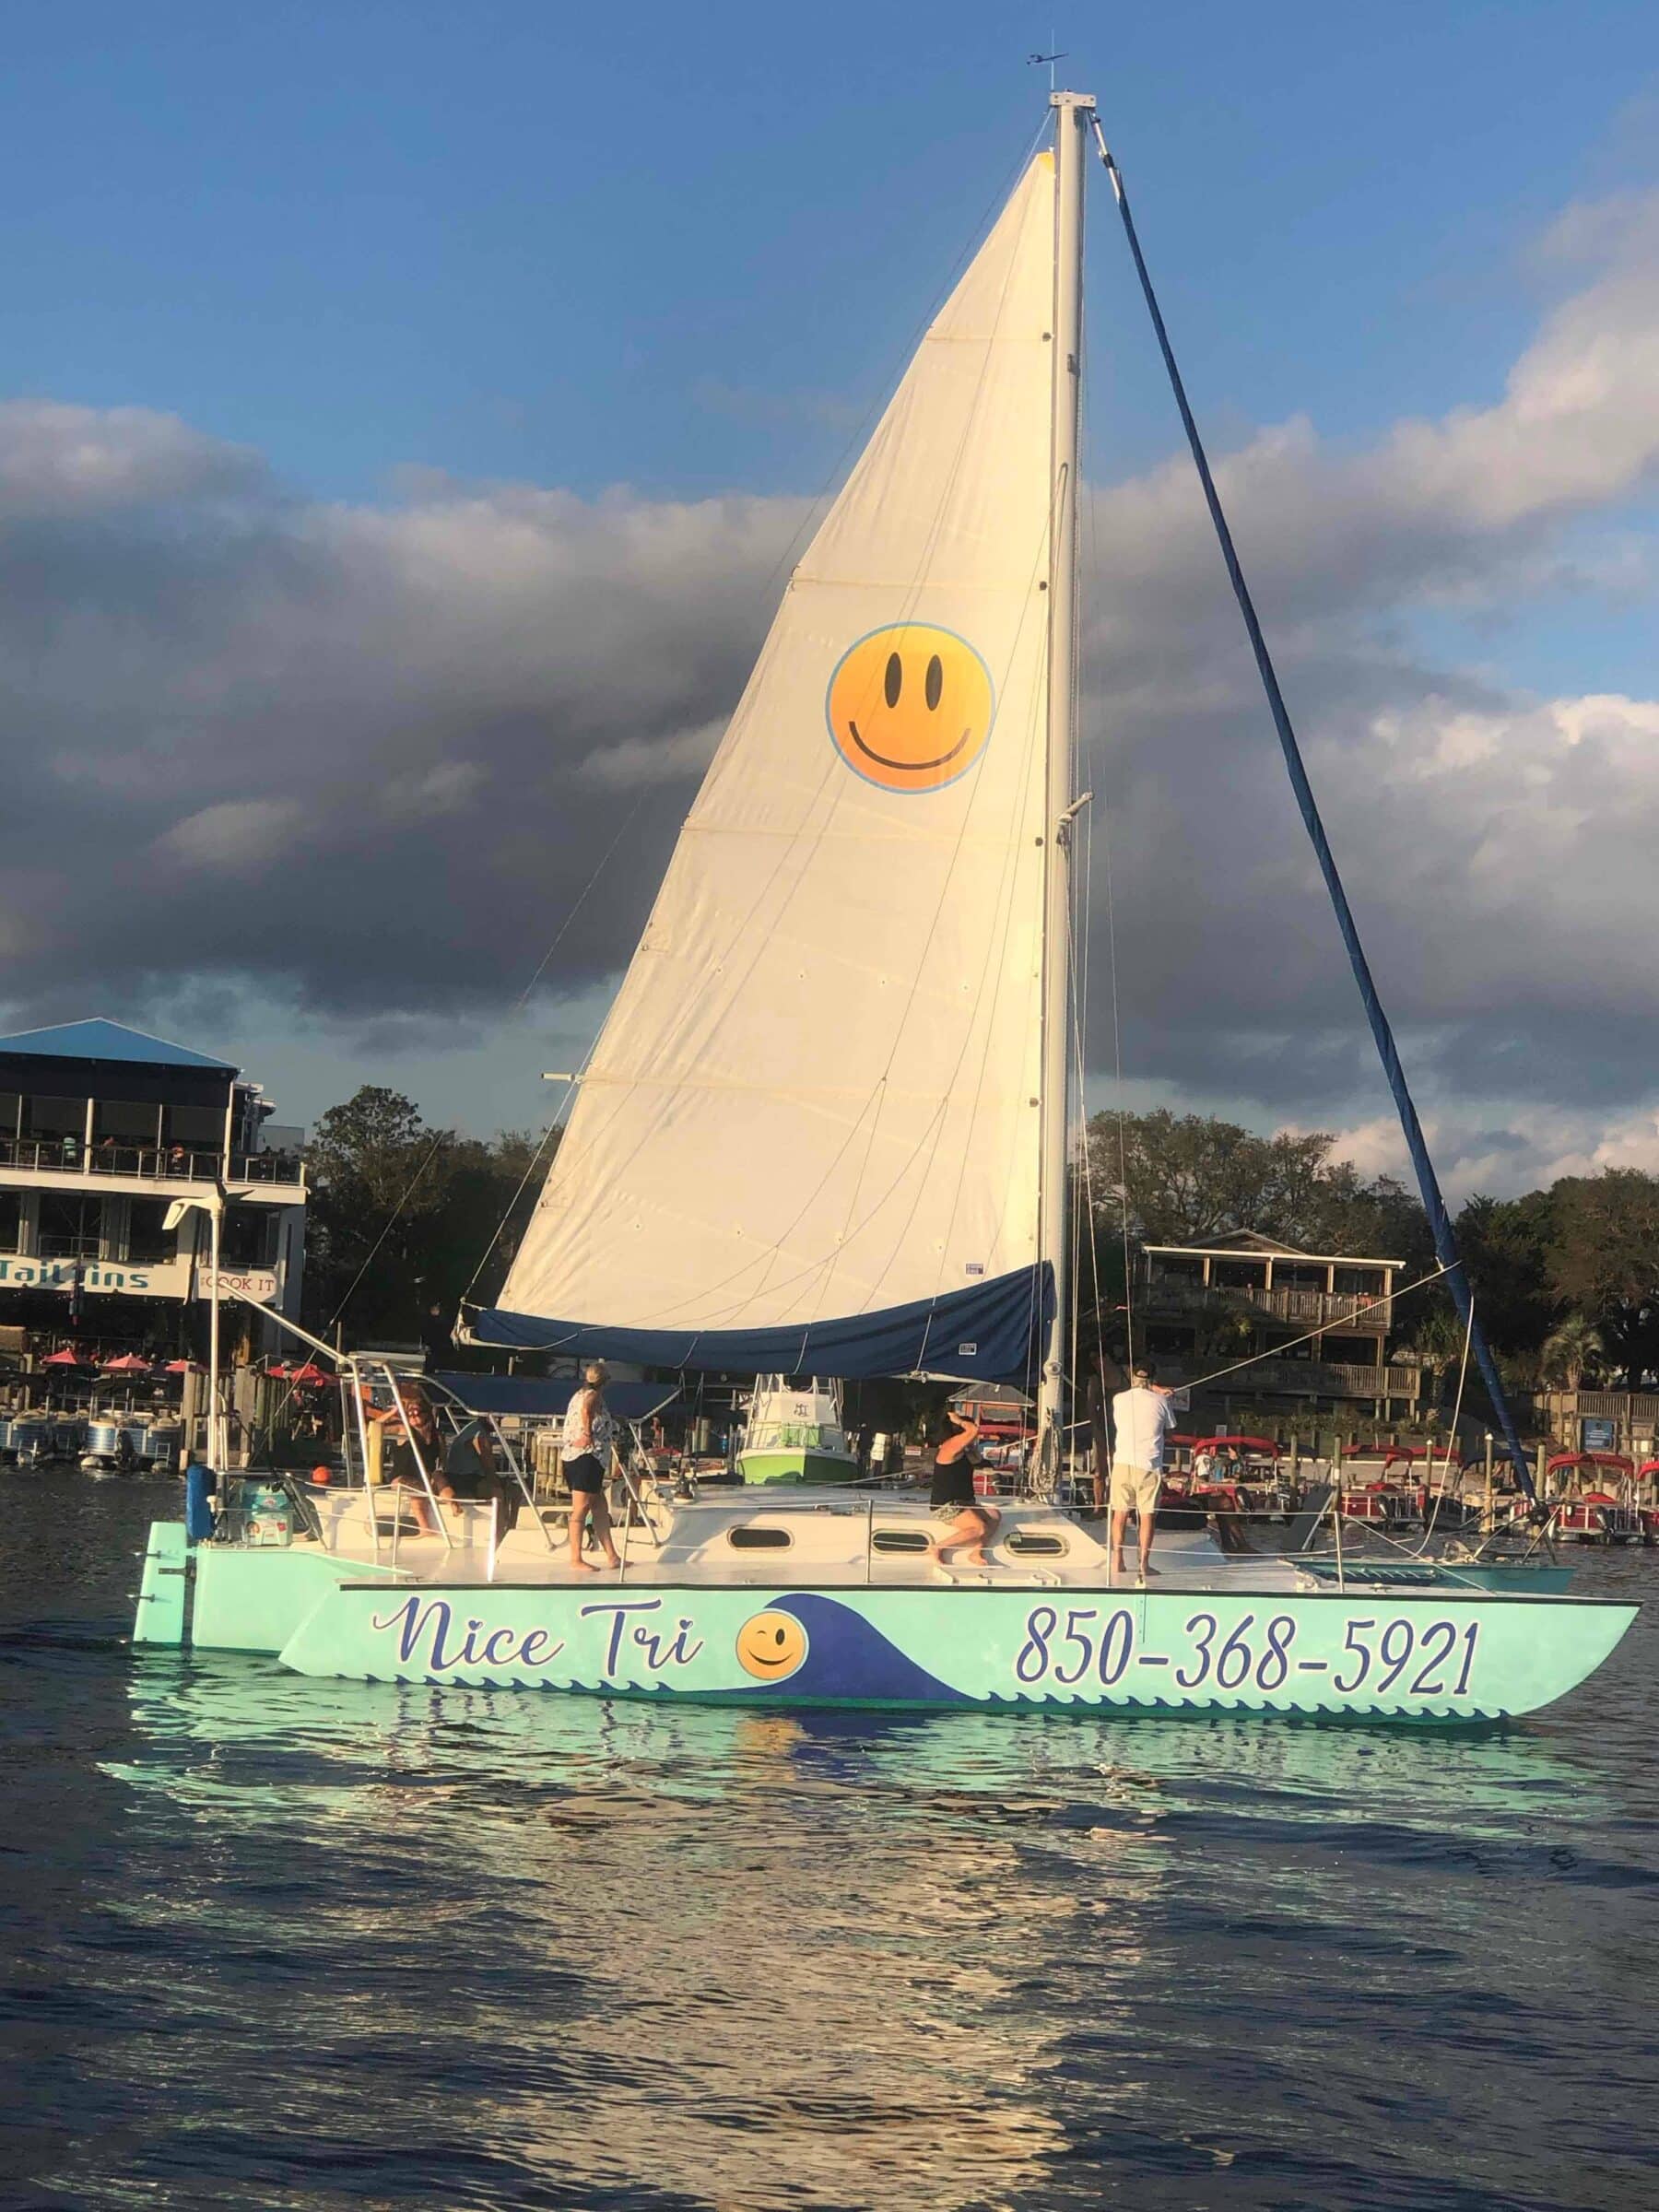 Nice Tri Charter Boat – Look For The Smiley Face